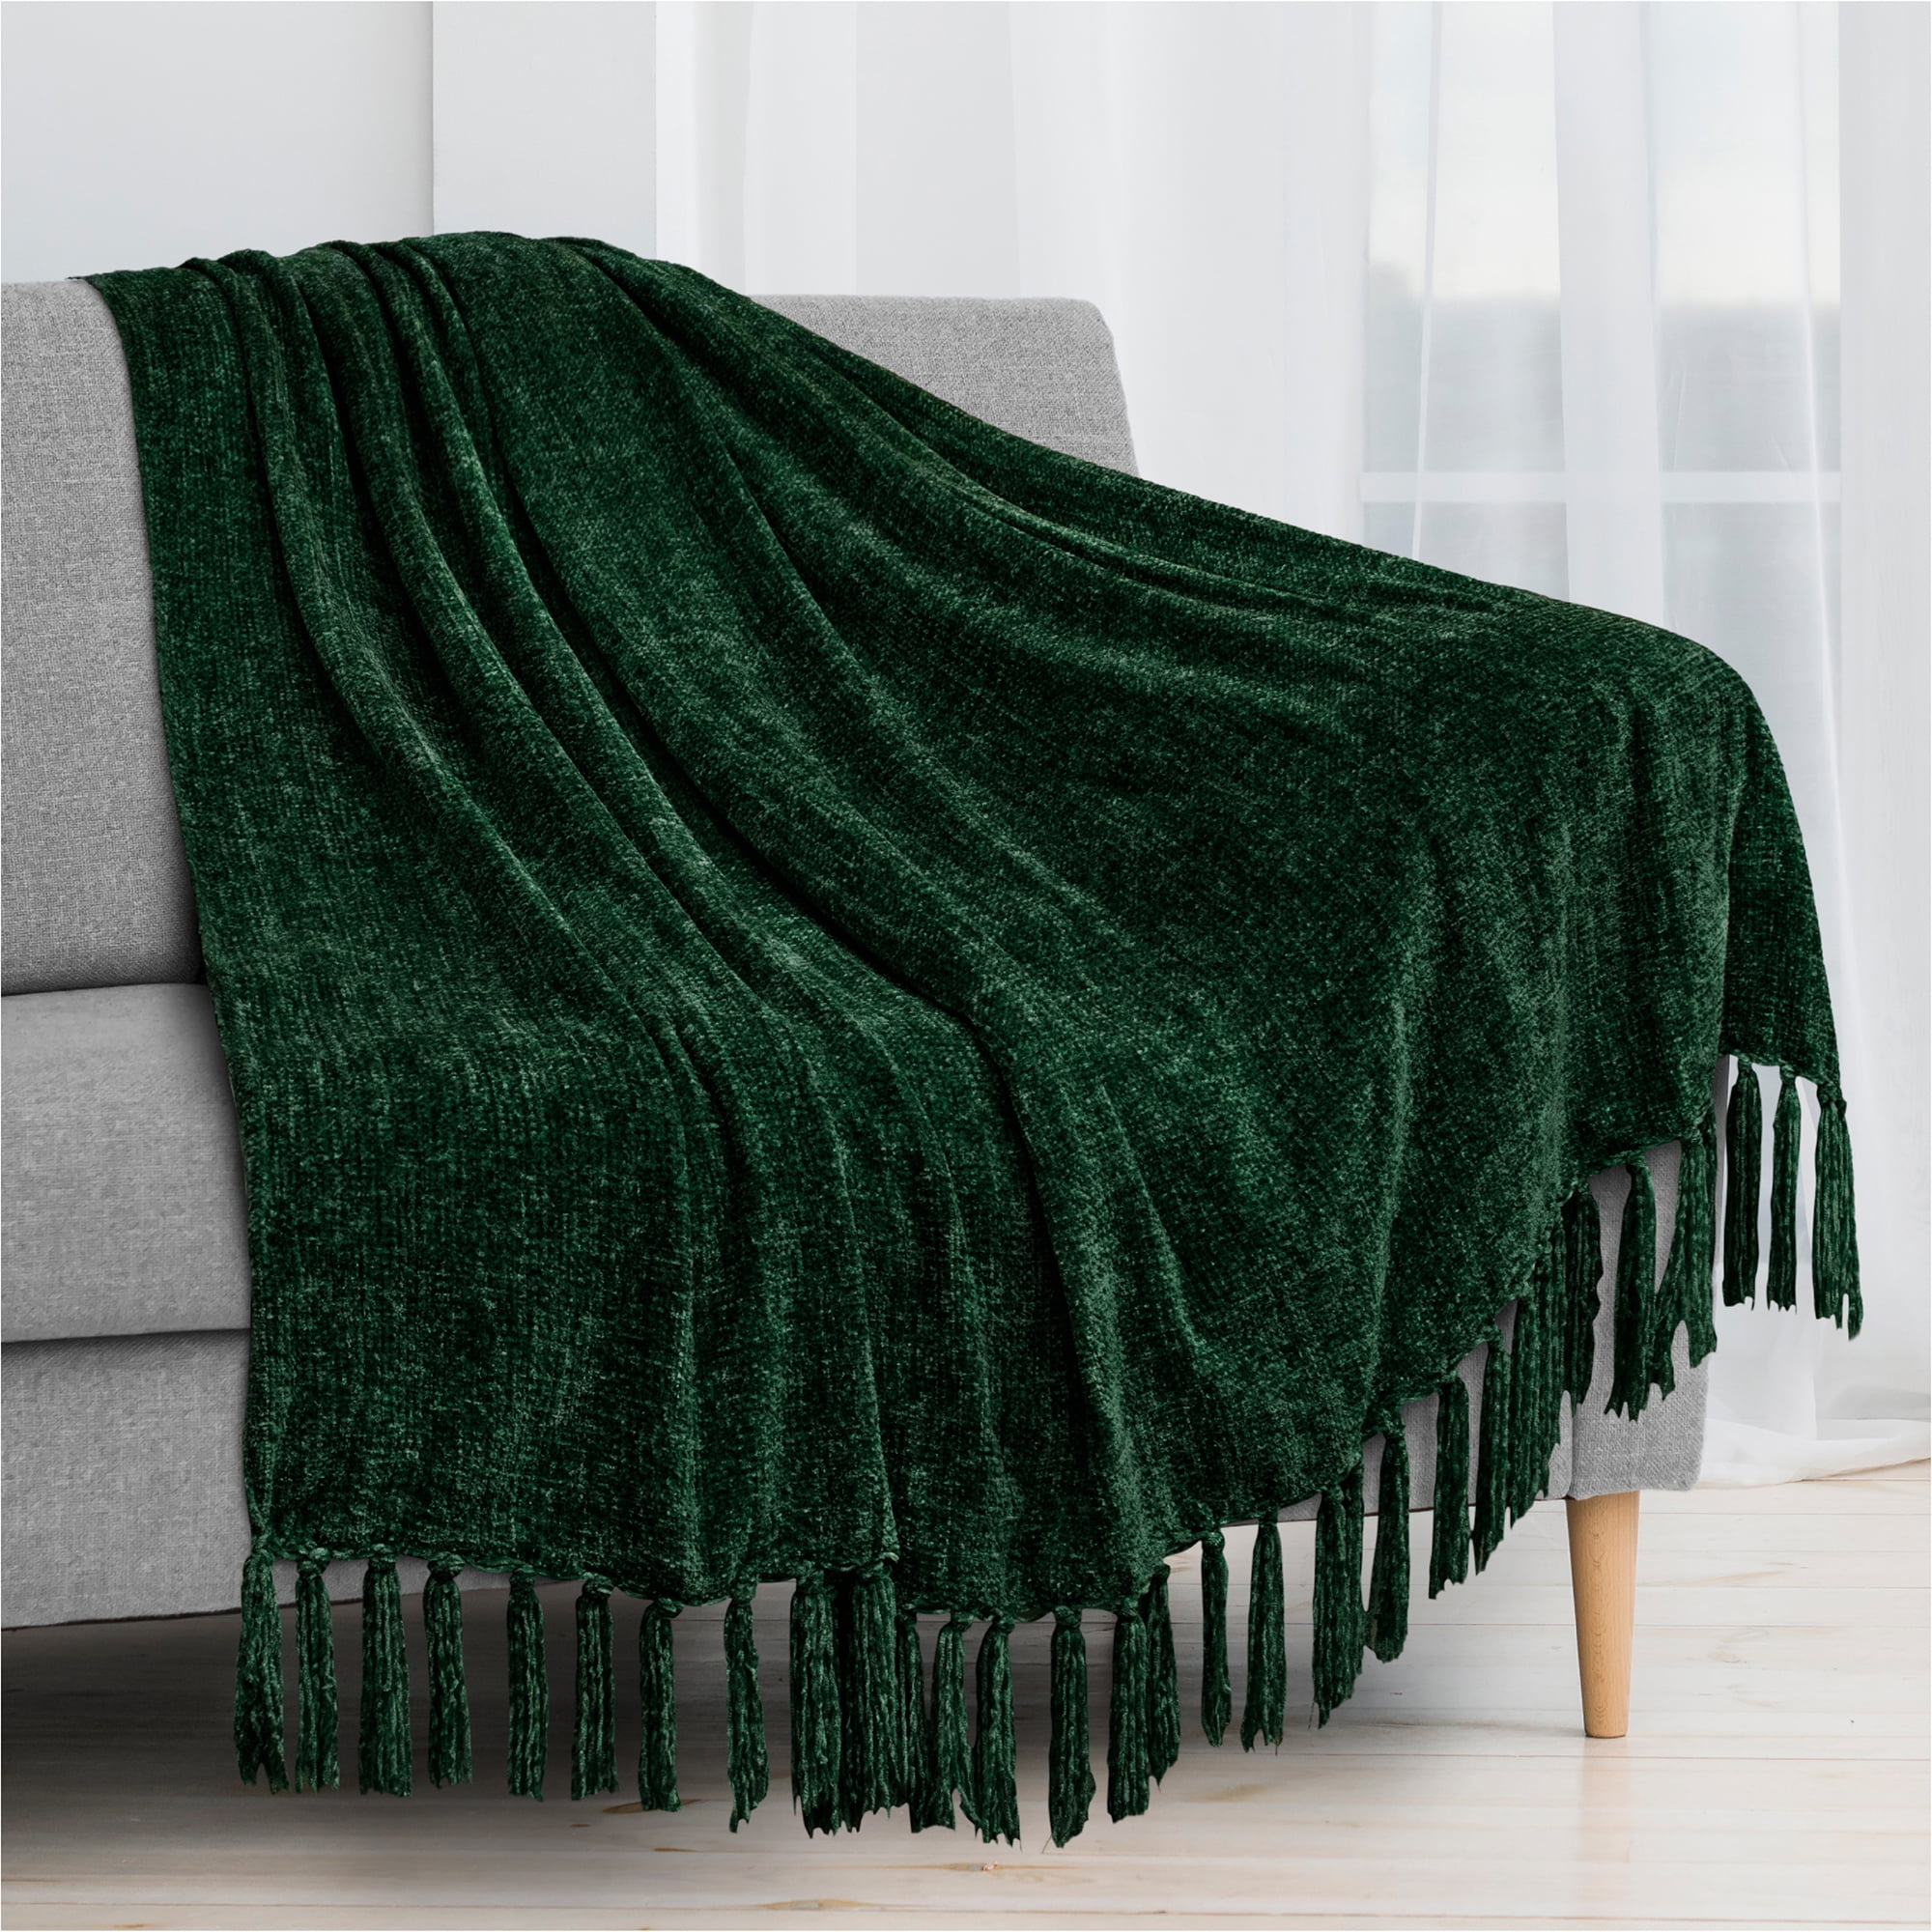 Details about   Cream Throw Blanket Sofa Couch Bed Super Soft 50x60 Sherpa Knitted Woven Tassel 